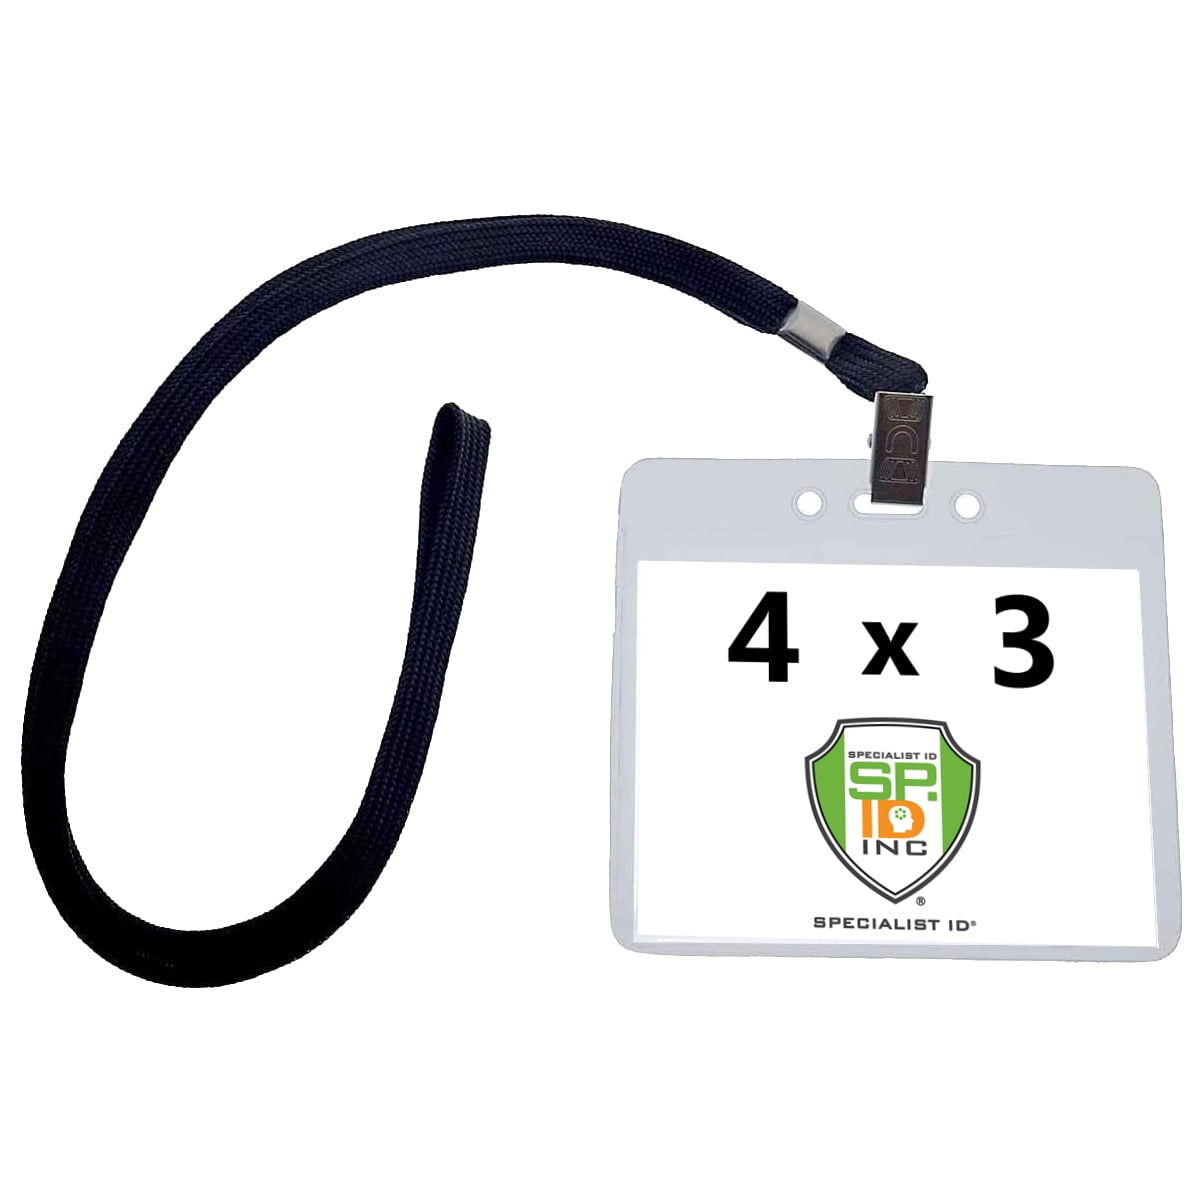 LOT 50 VERTICAL SPORT TICKET HOLDER 7 X 4 WITH NECK LANYARD 3 STYLES FREE SHIP 